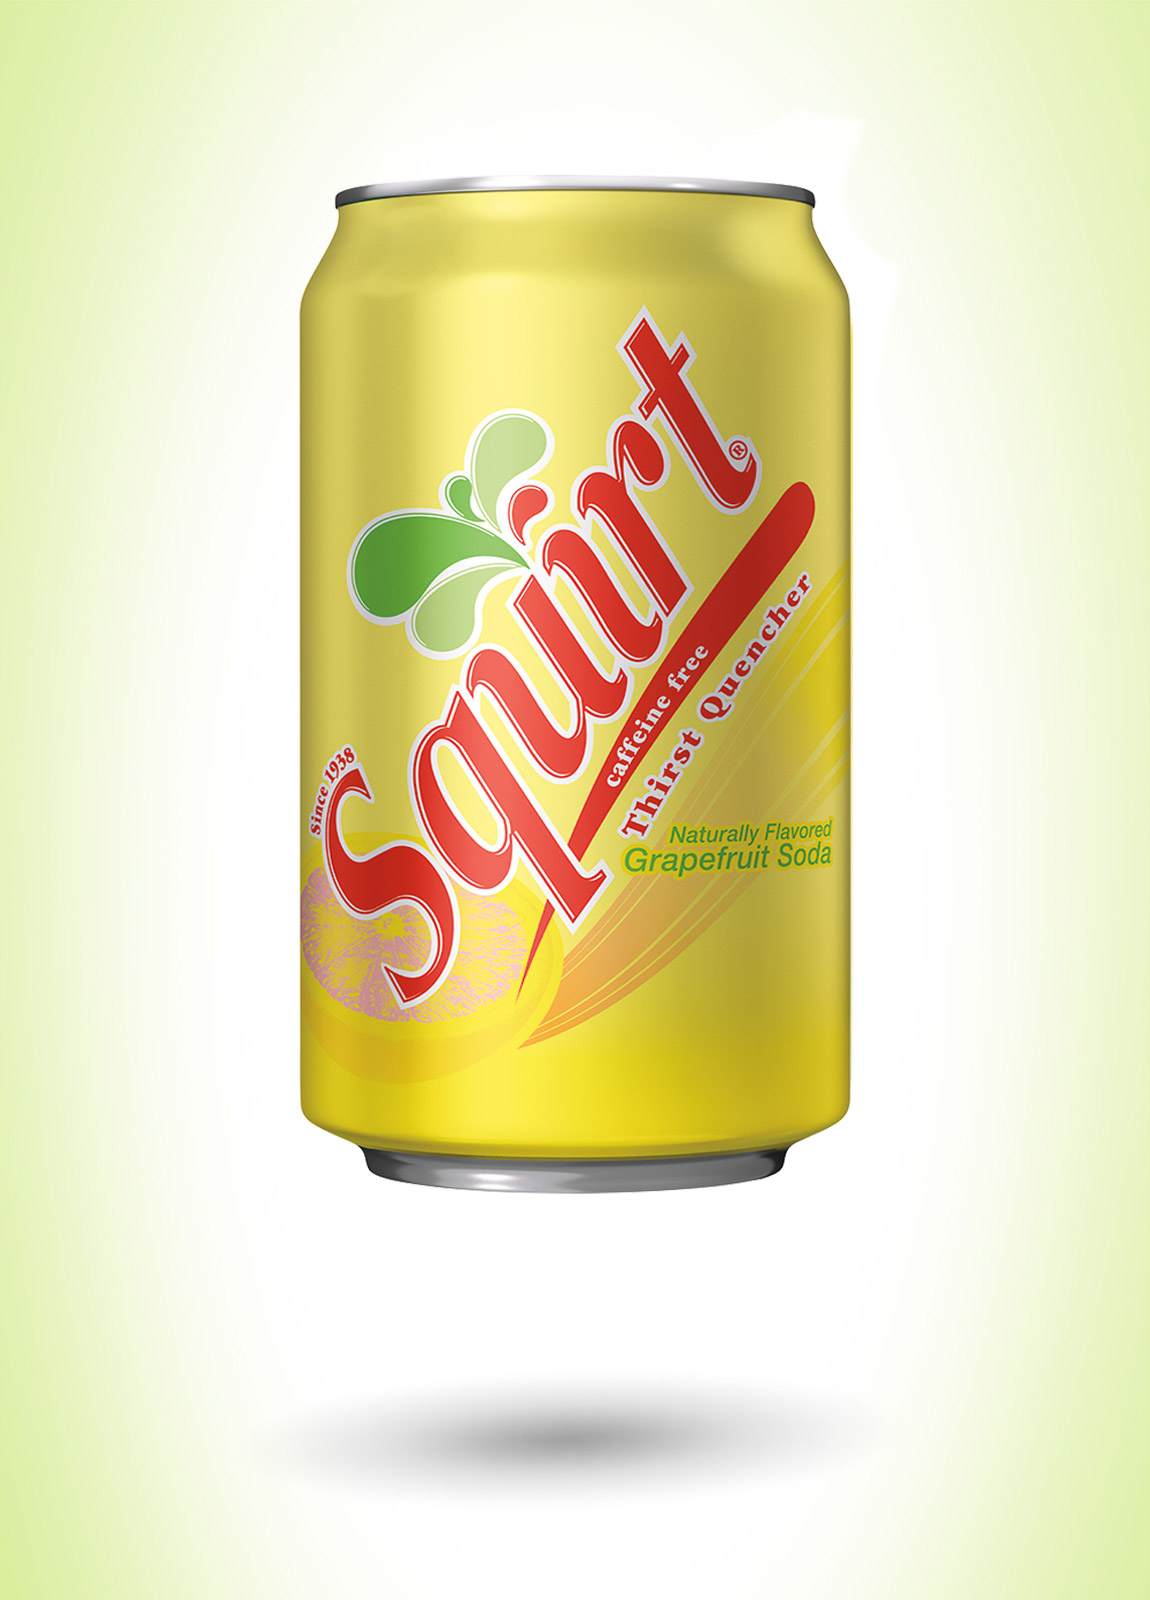 Who owns squirt